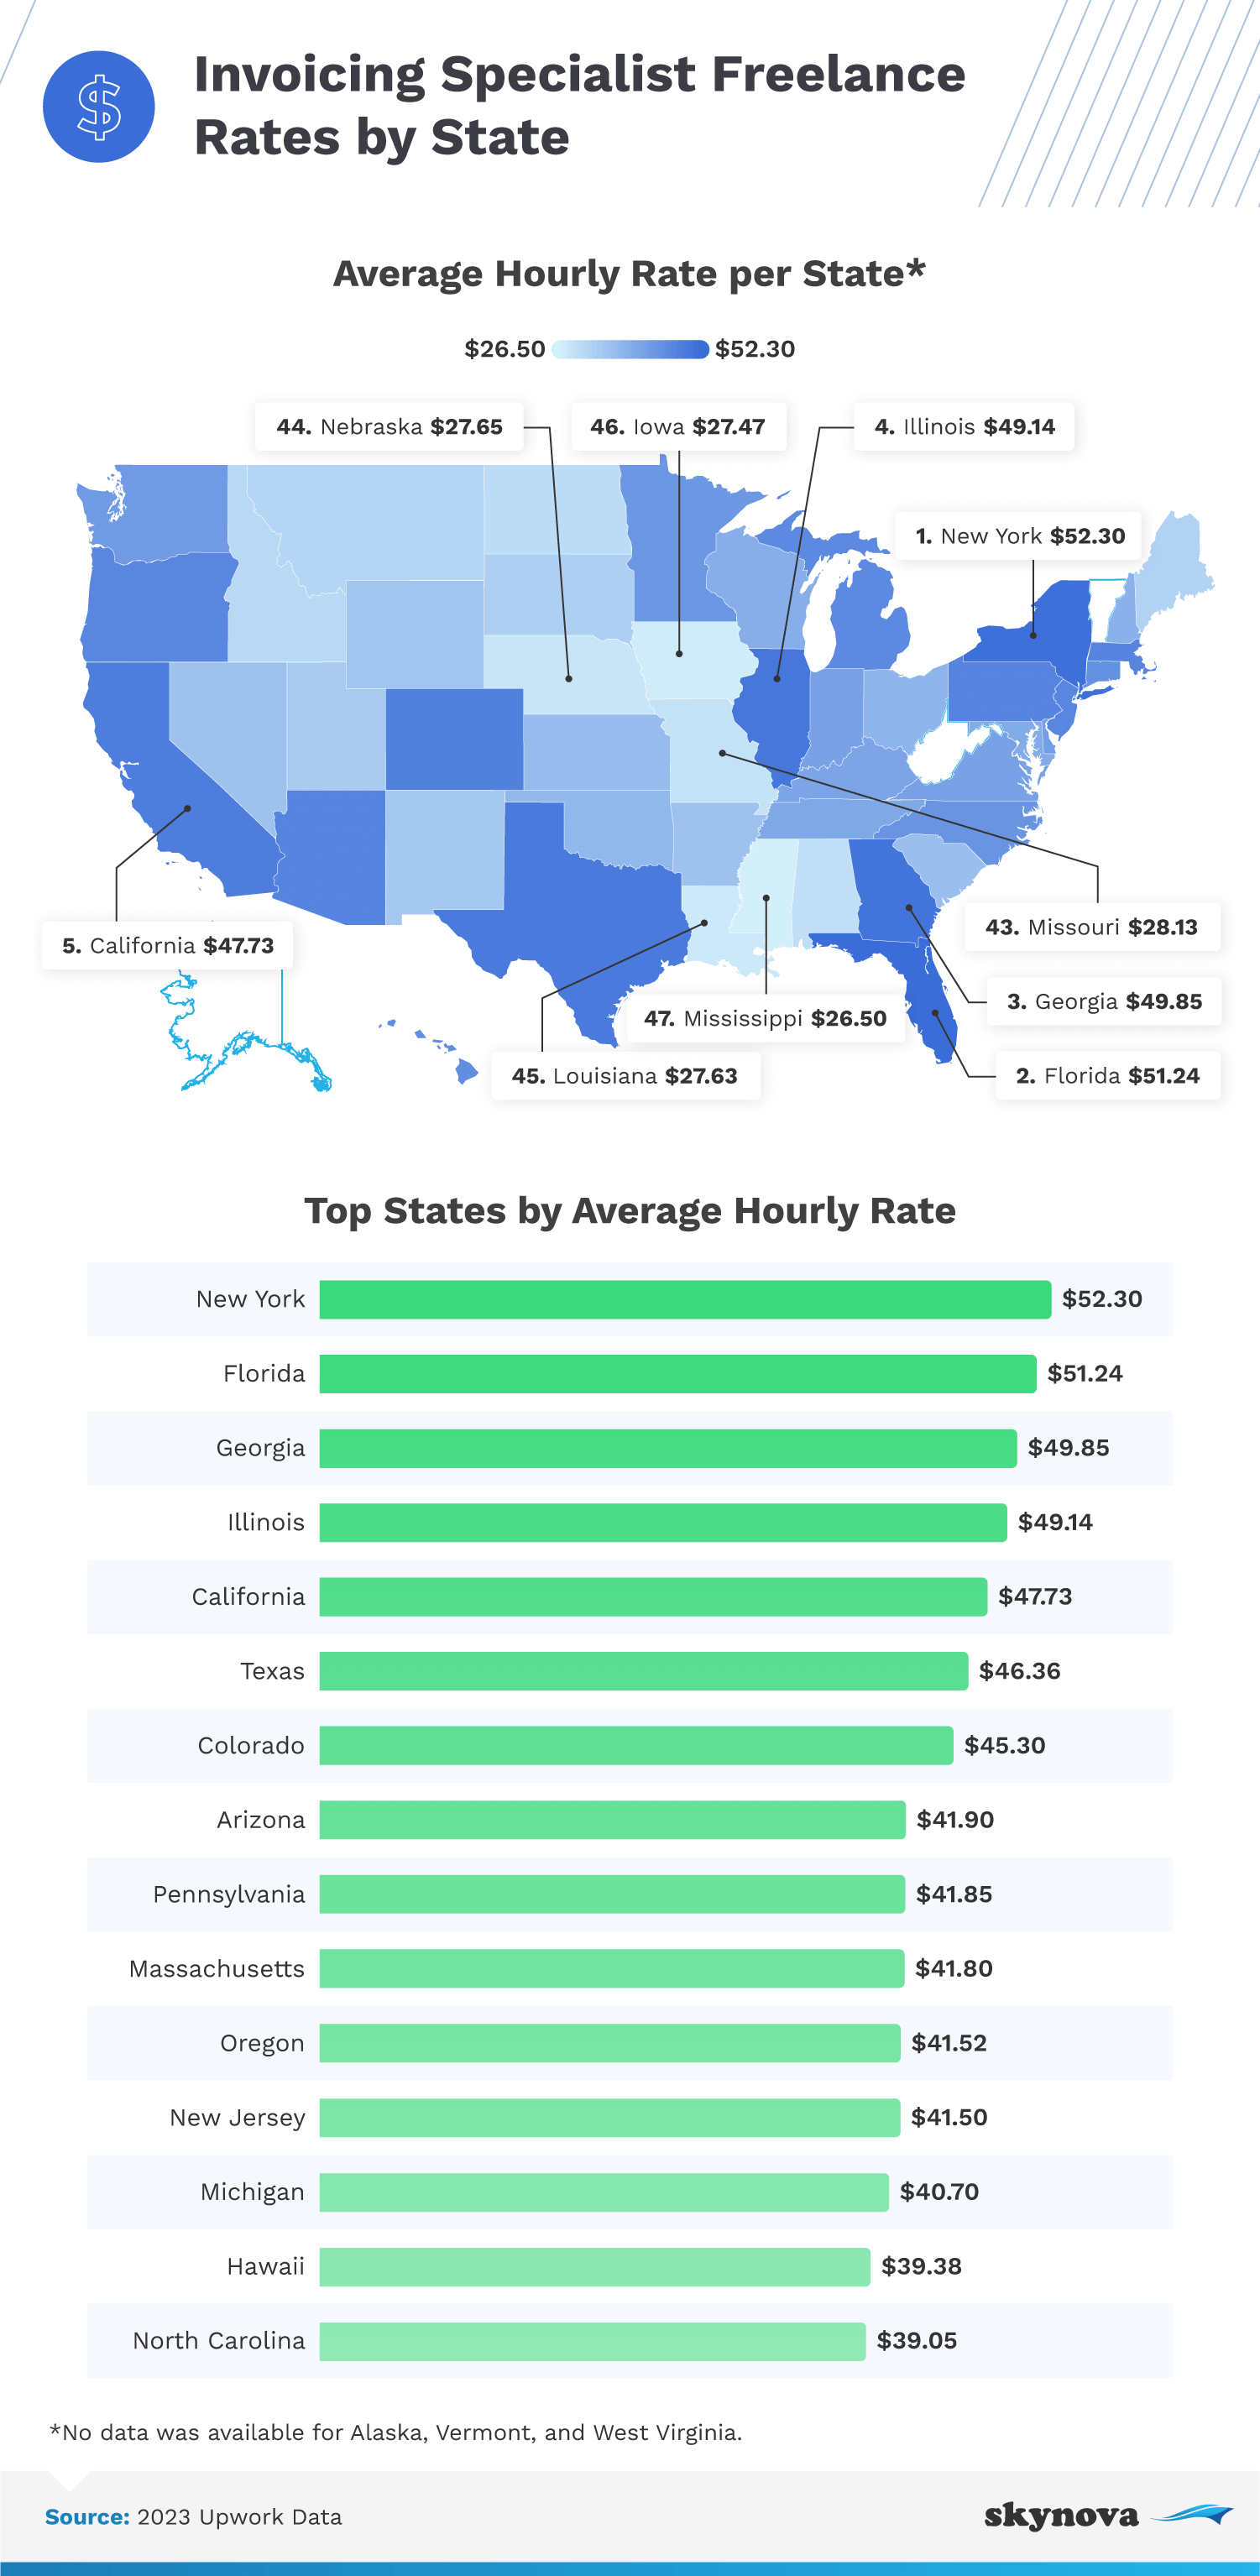 Invoicing professionals' rates by state